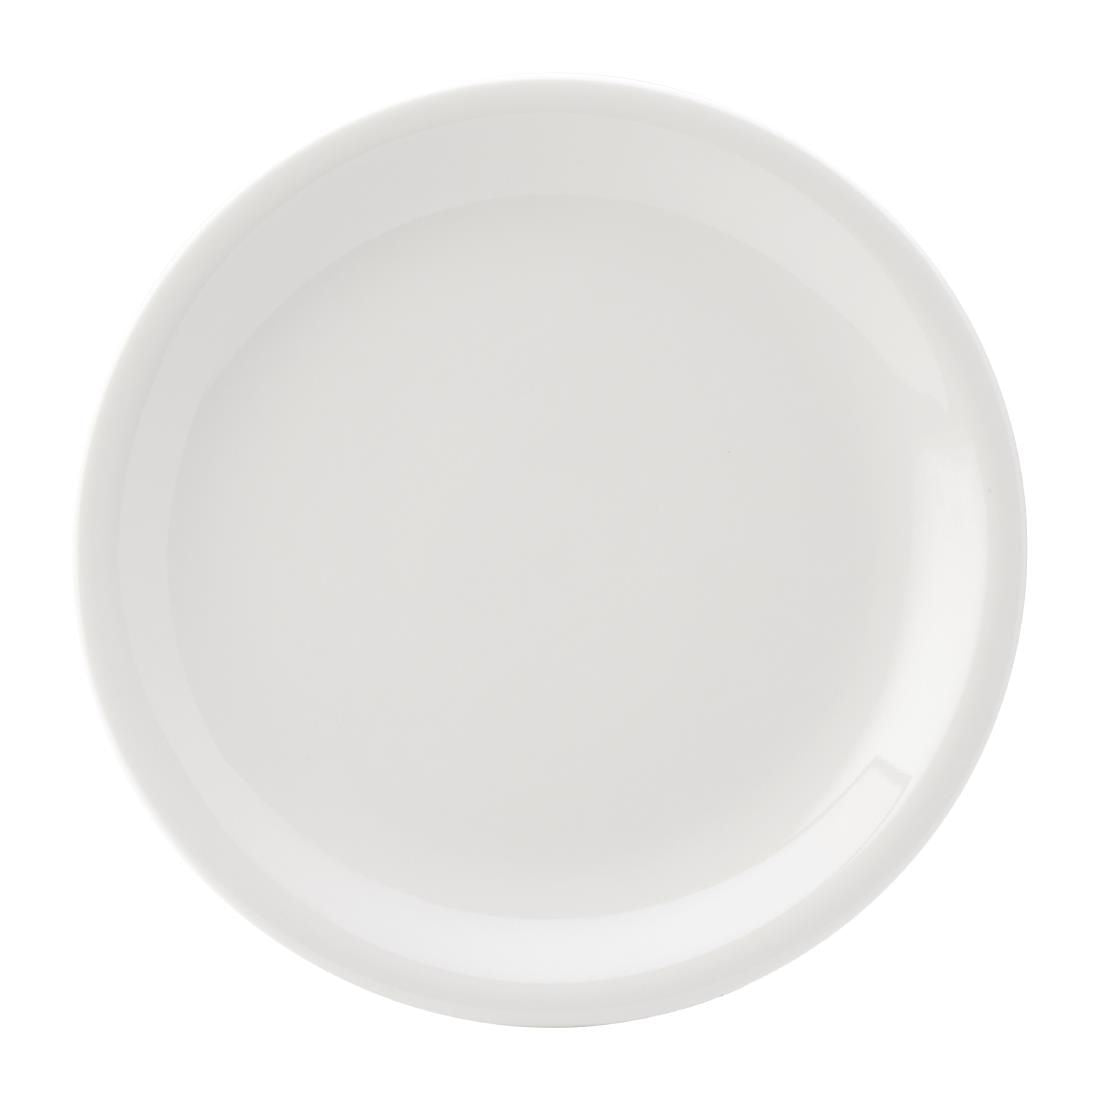 DY319 Utopia Titan Narrow Rimmed Plates White 260mm (Pack of 6)